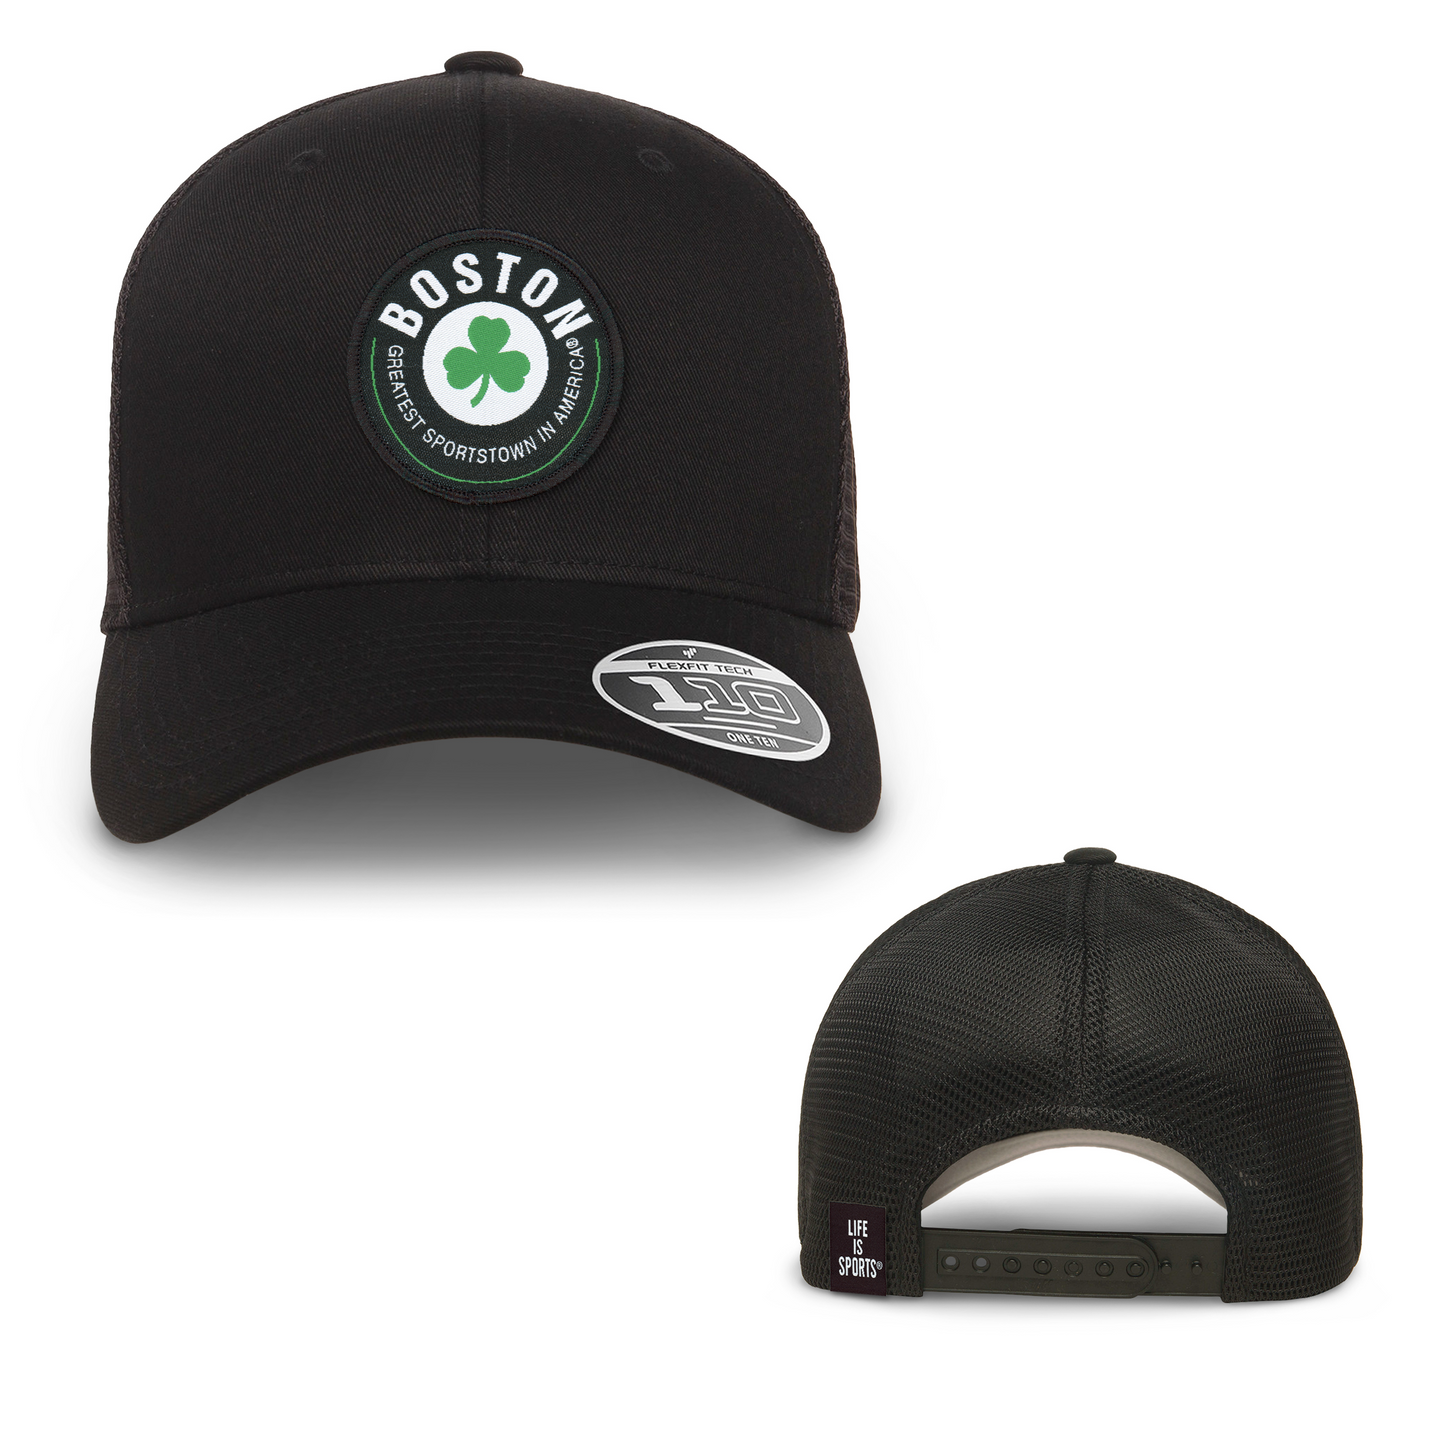 BOSTON Shamrock Hat. The More you wear the Shamrock, the luckier you get!